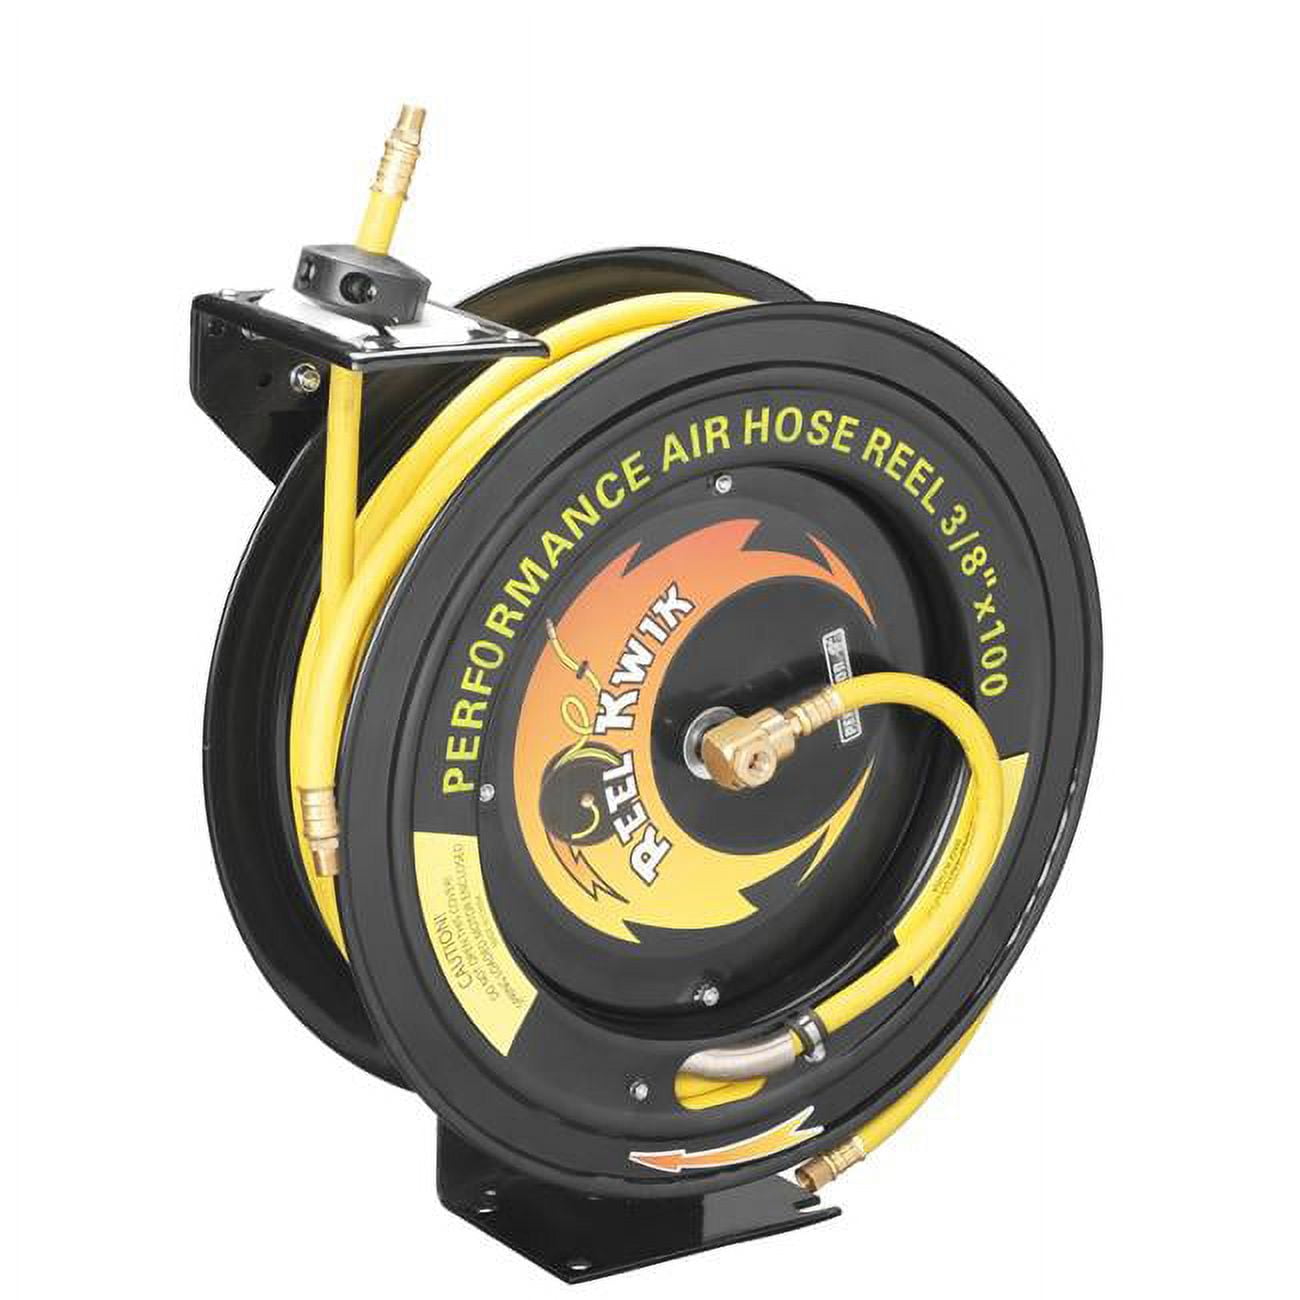 Heavy Duty Retractable 100-Foot Air Compressor Hose and Reel by